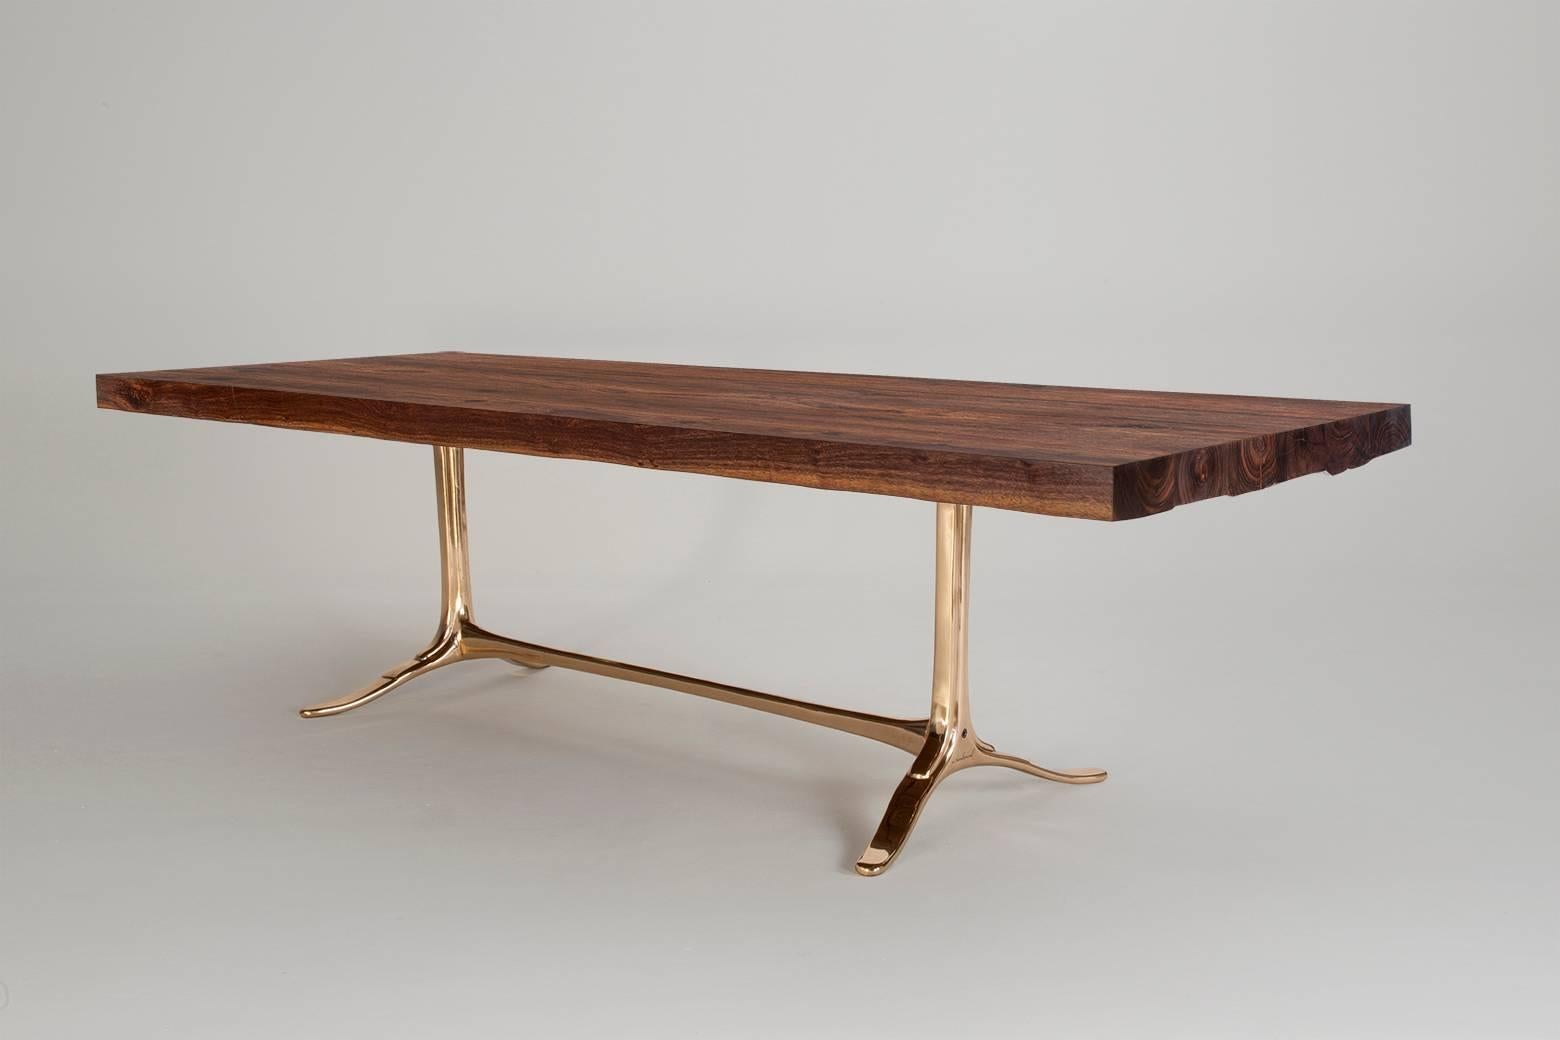 Minimalist Bespoke Reclaimed Hardwood Table with Bronze Polished Base, by P. Tendercool For Sale